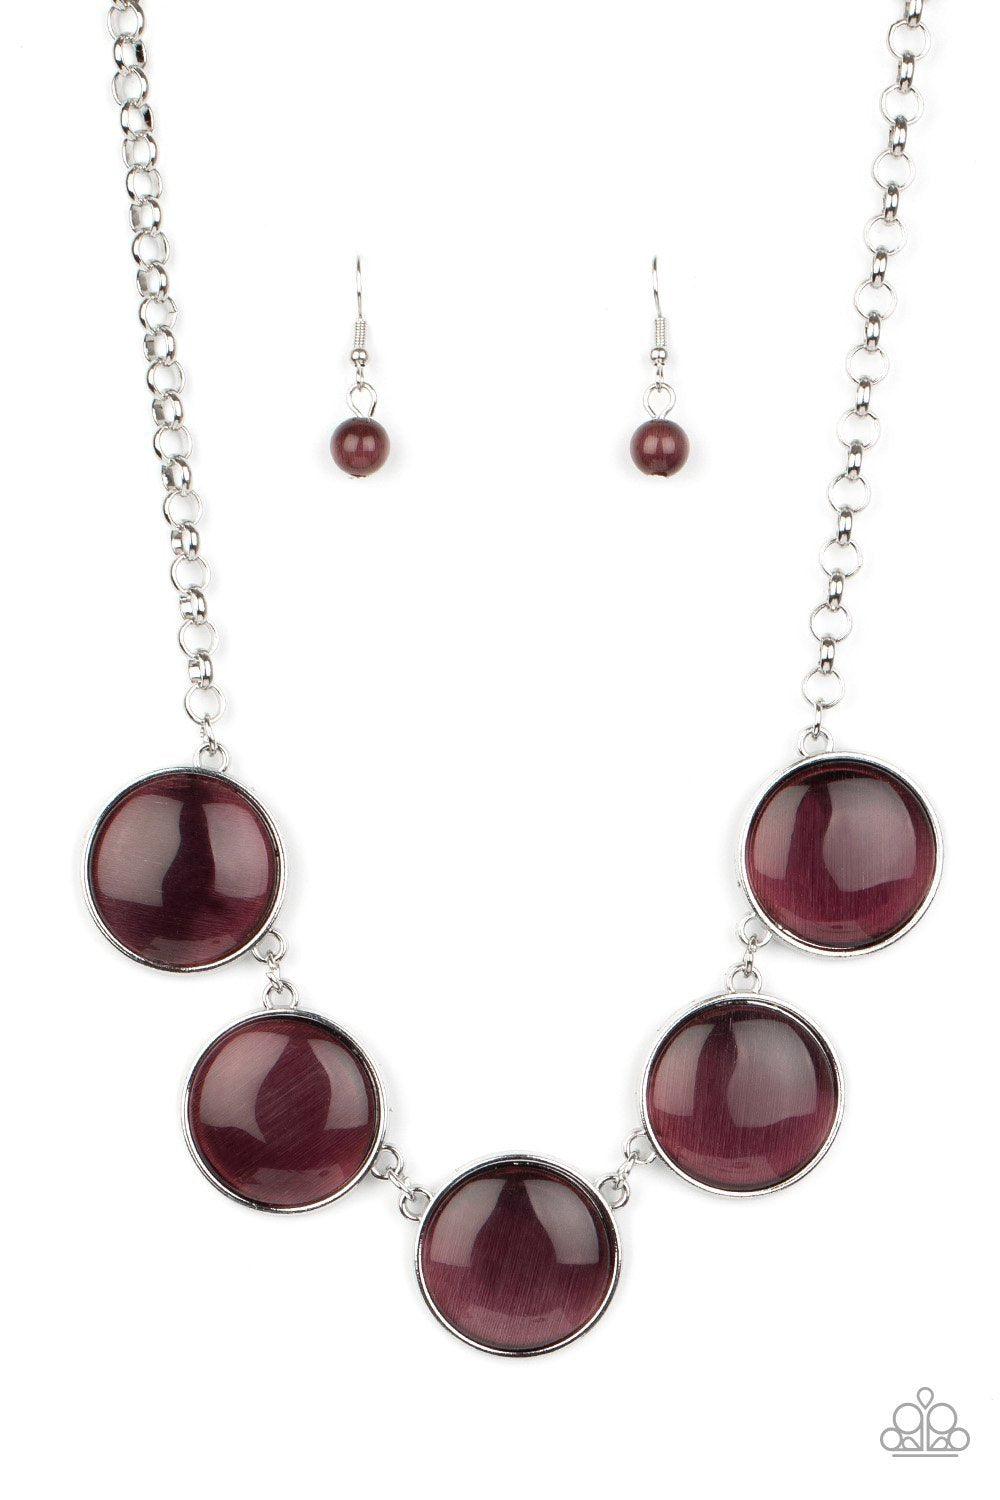 Ethereal Escape Purple Cat's Eye Stone Necklace - Paparazzi Accessories-CarasShop.com - $5 Jewelry by Cara Jewels